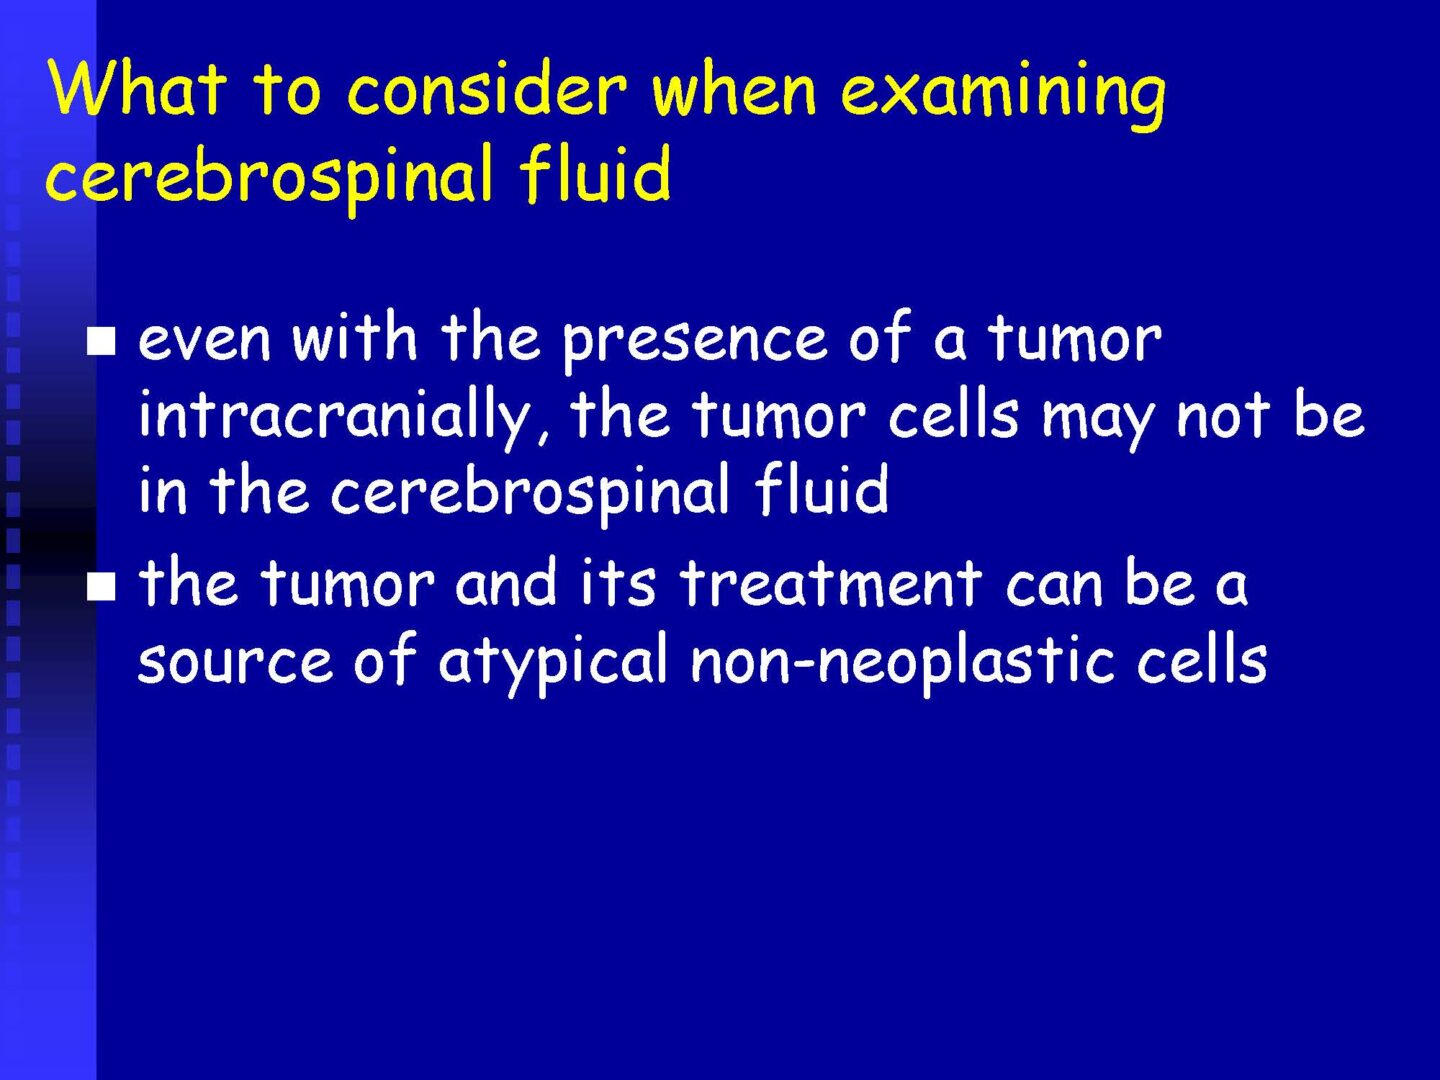 Cytology of the Cerebrospinal fluid - part II_Pagina_21